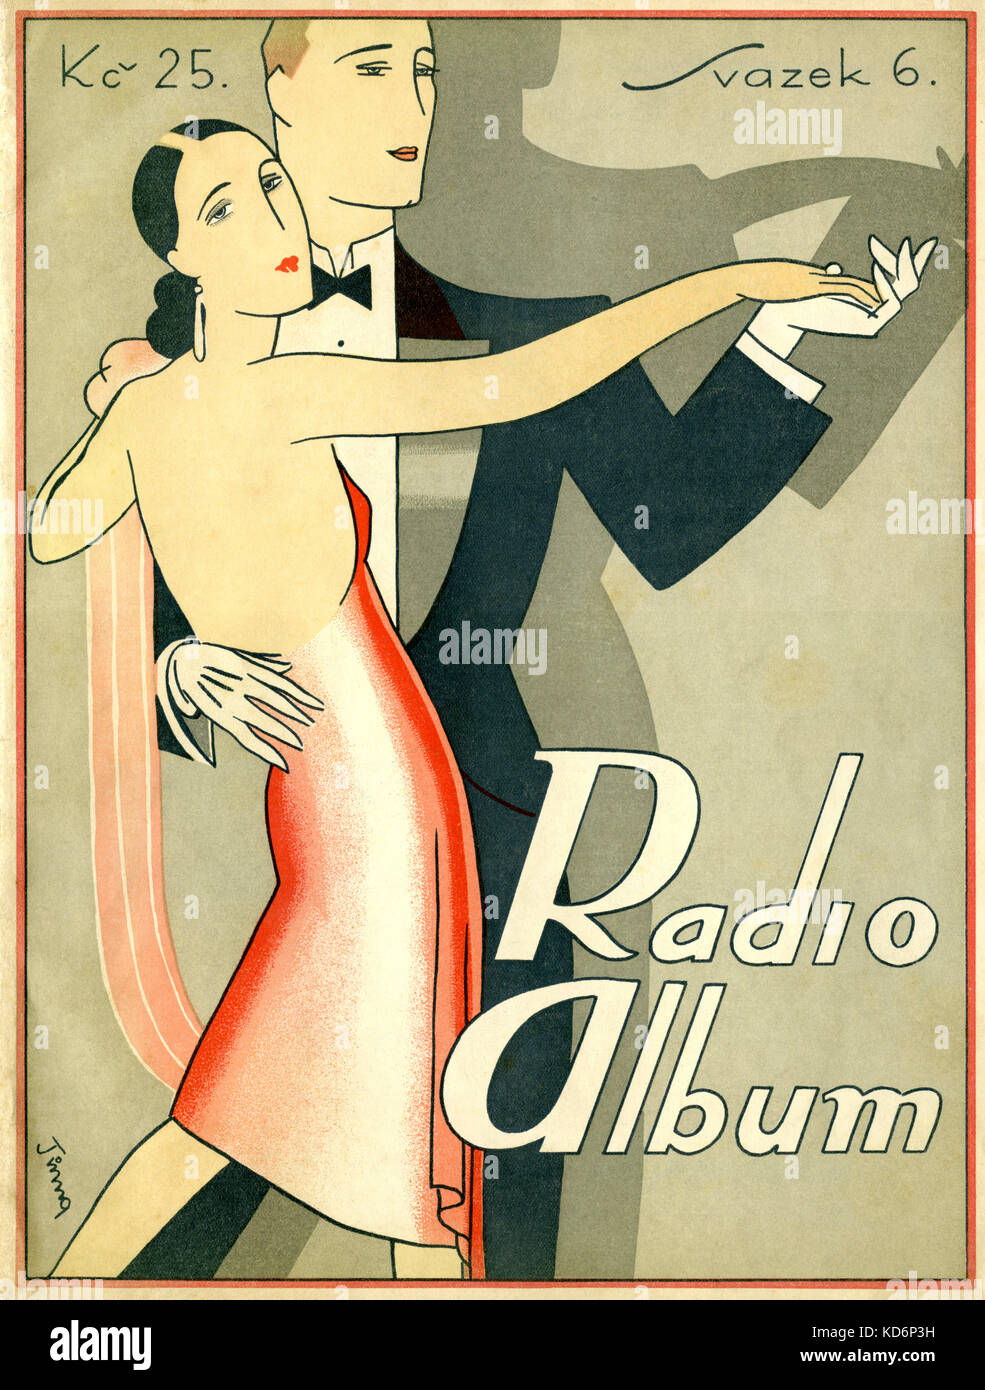 Radio Album  score cover for Czech versions of American dance tunes from 1925-1928. published  by Accord, Prague, c. 1929-1930. Low evening dress, concert dress. Artist not known. Stock Photo